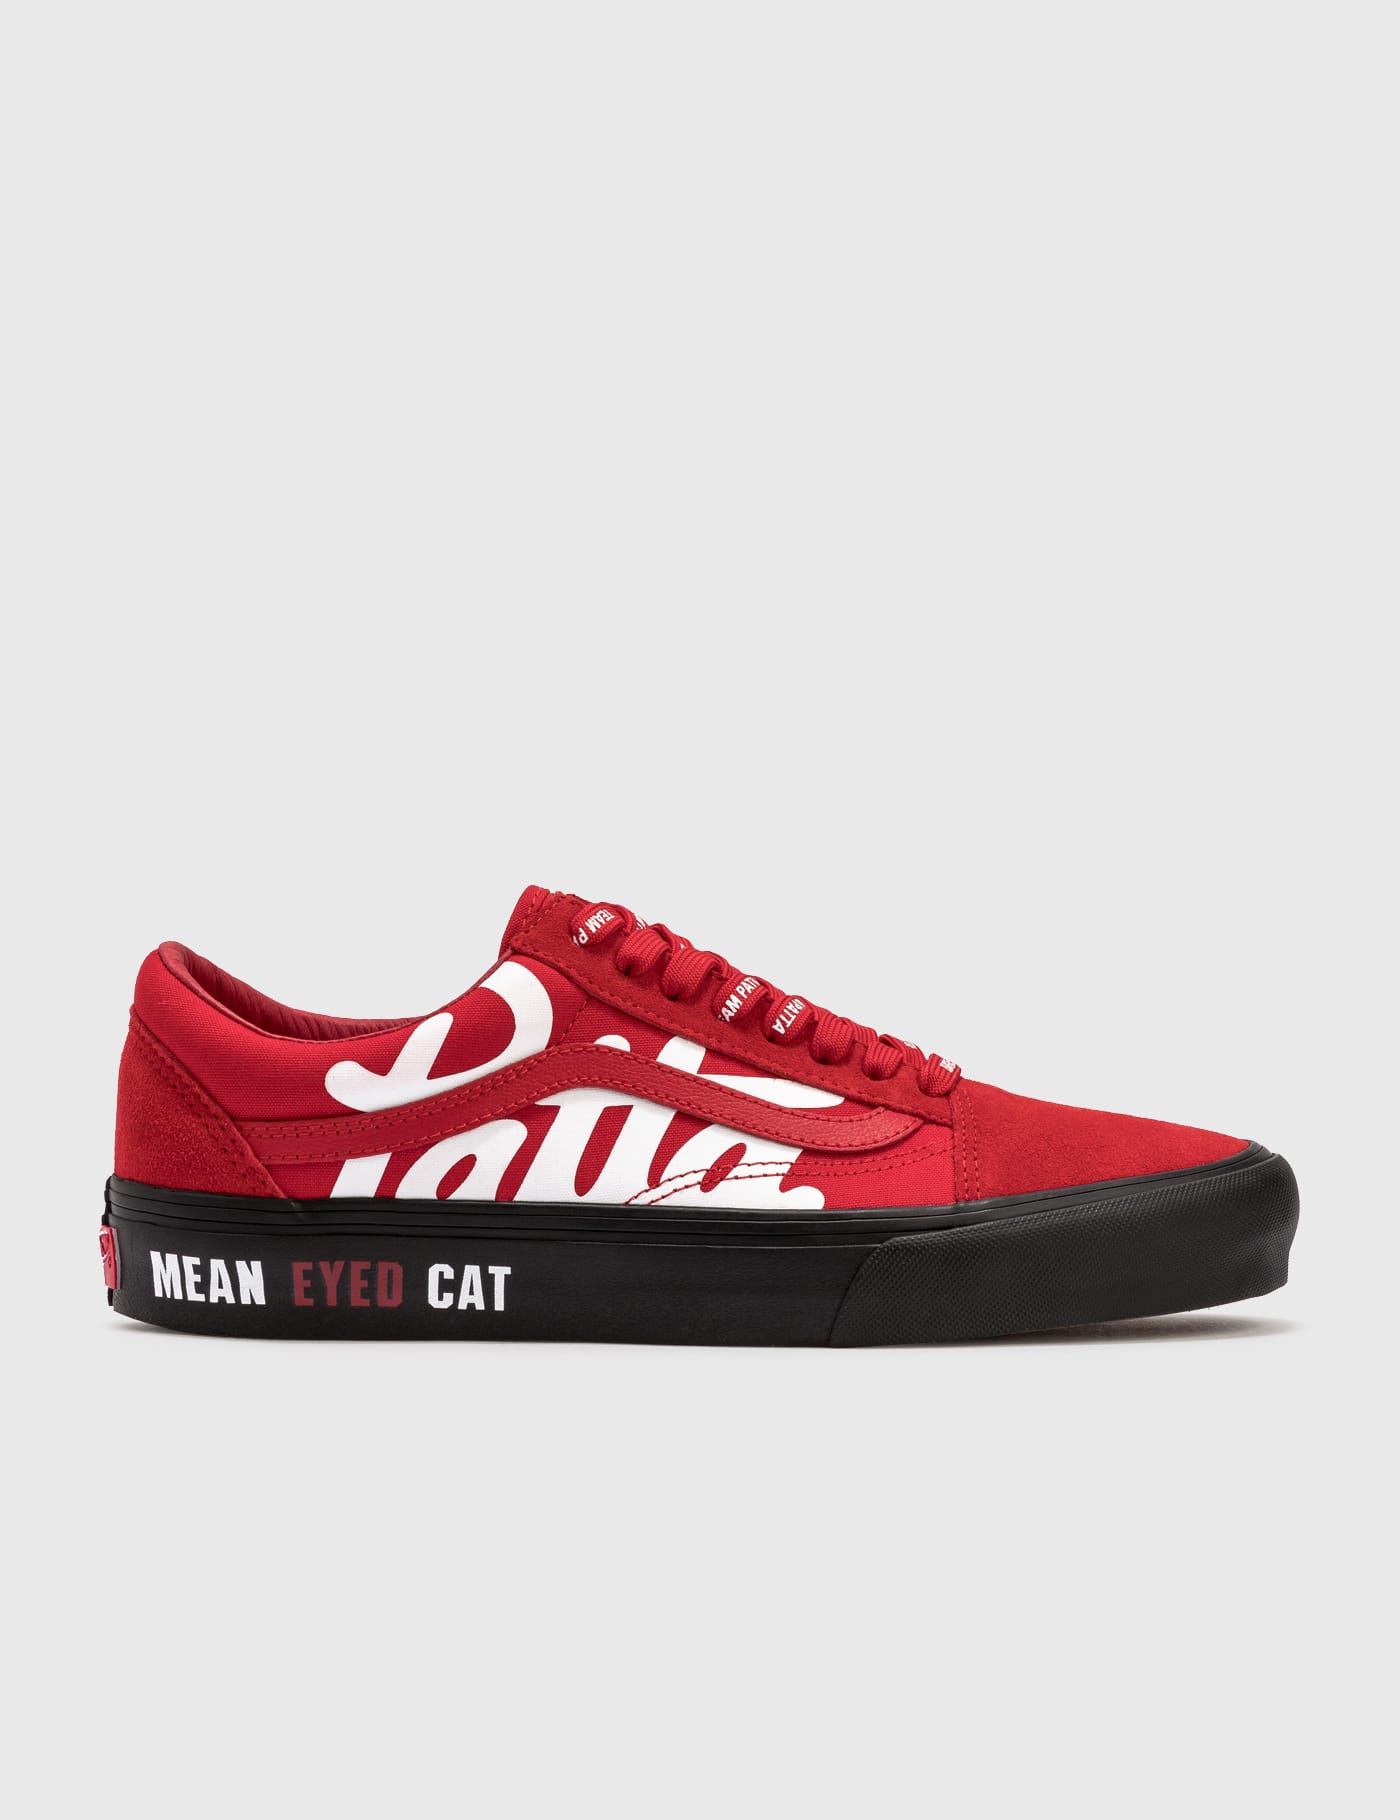 Vans - Vans x Patta Old Skool VLT LX | HBX - Globally Curated Fashion and  Lifestyle by Hypebeast